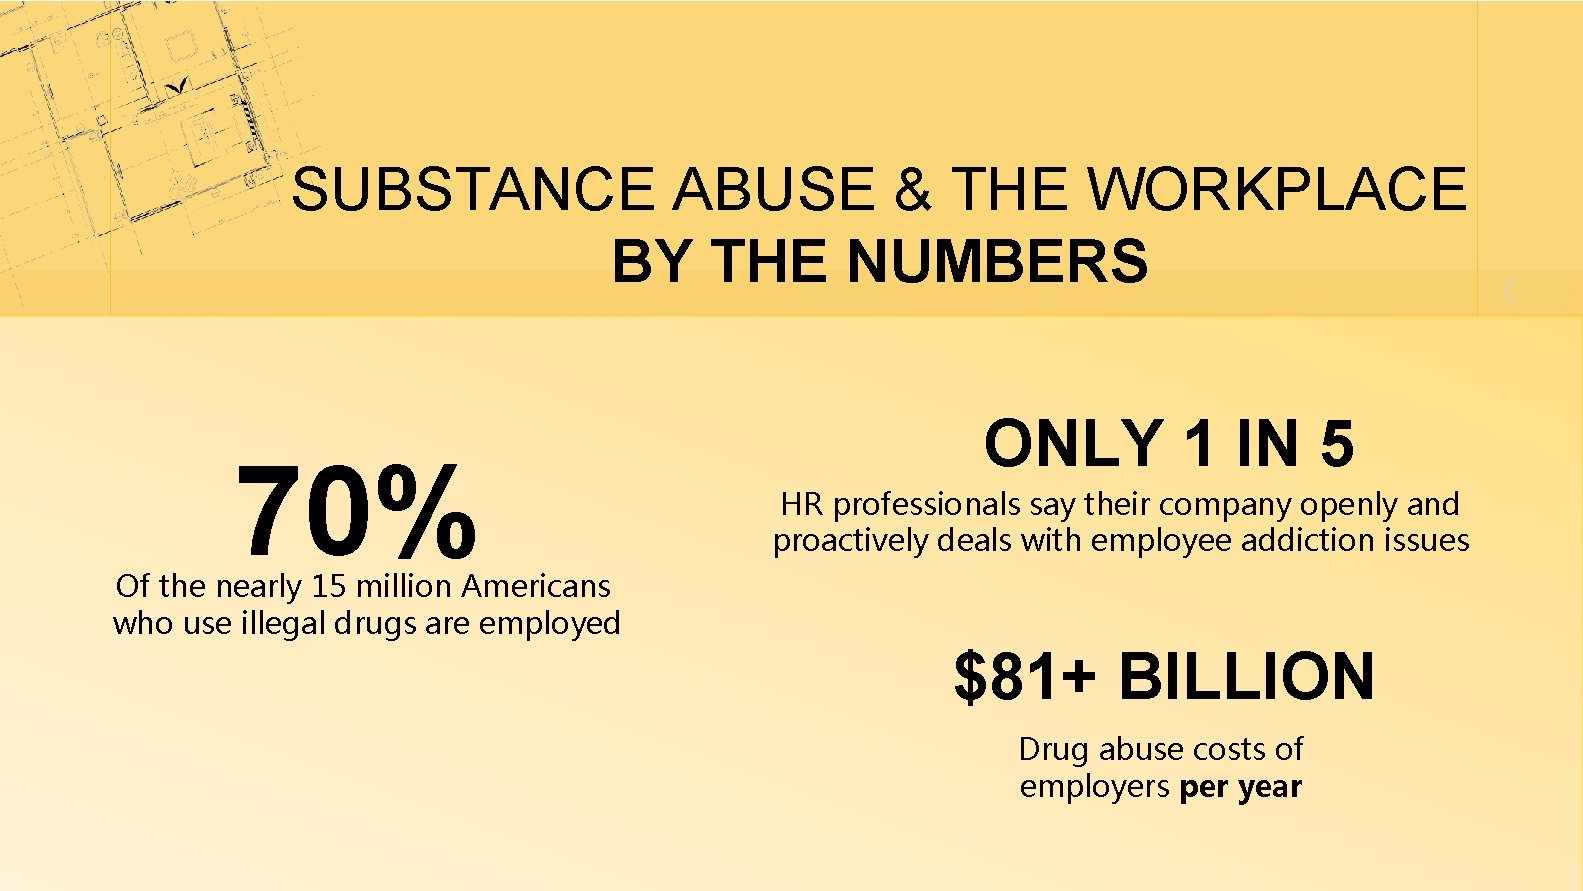 SUBSTANCE ABUSE & THE WORKPLACE BY THE NUMBERS 70% Of the nearly 15 million